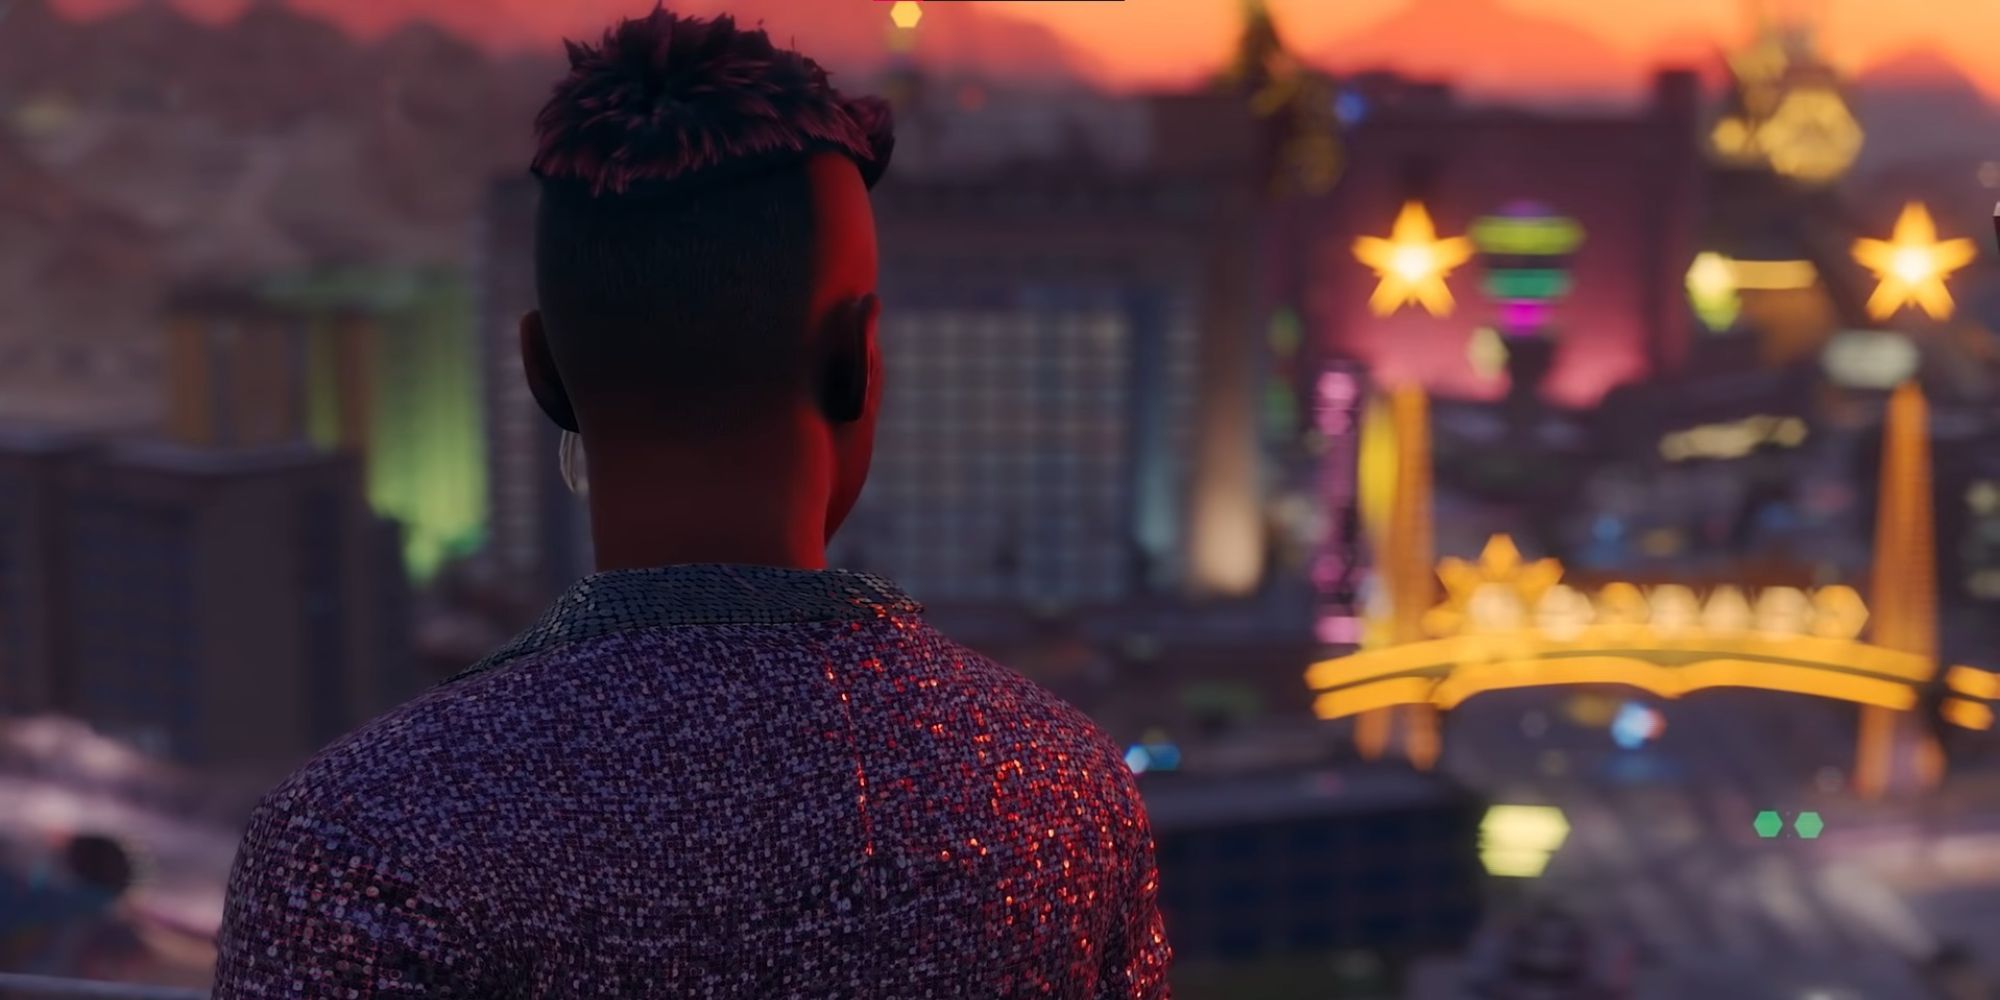 Saints Row Character Looking Over City